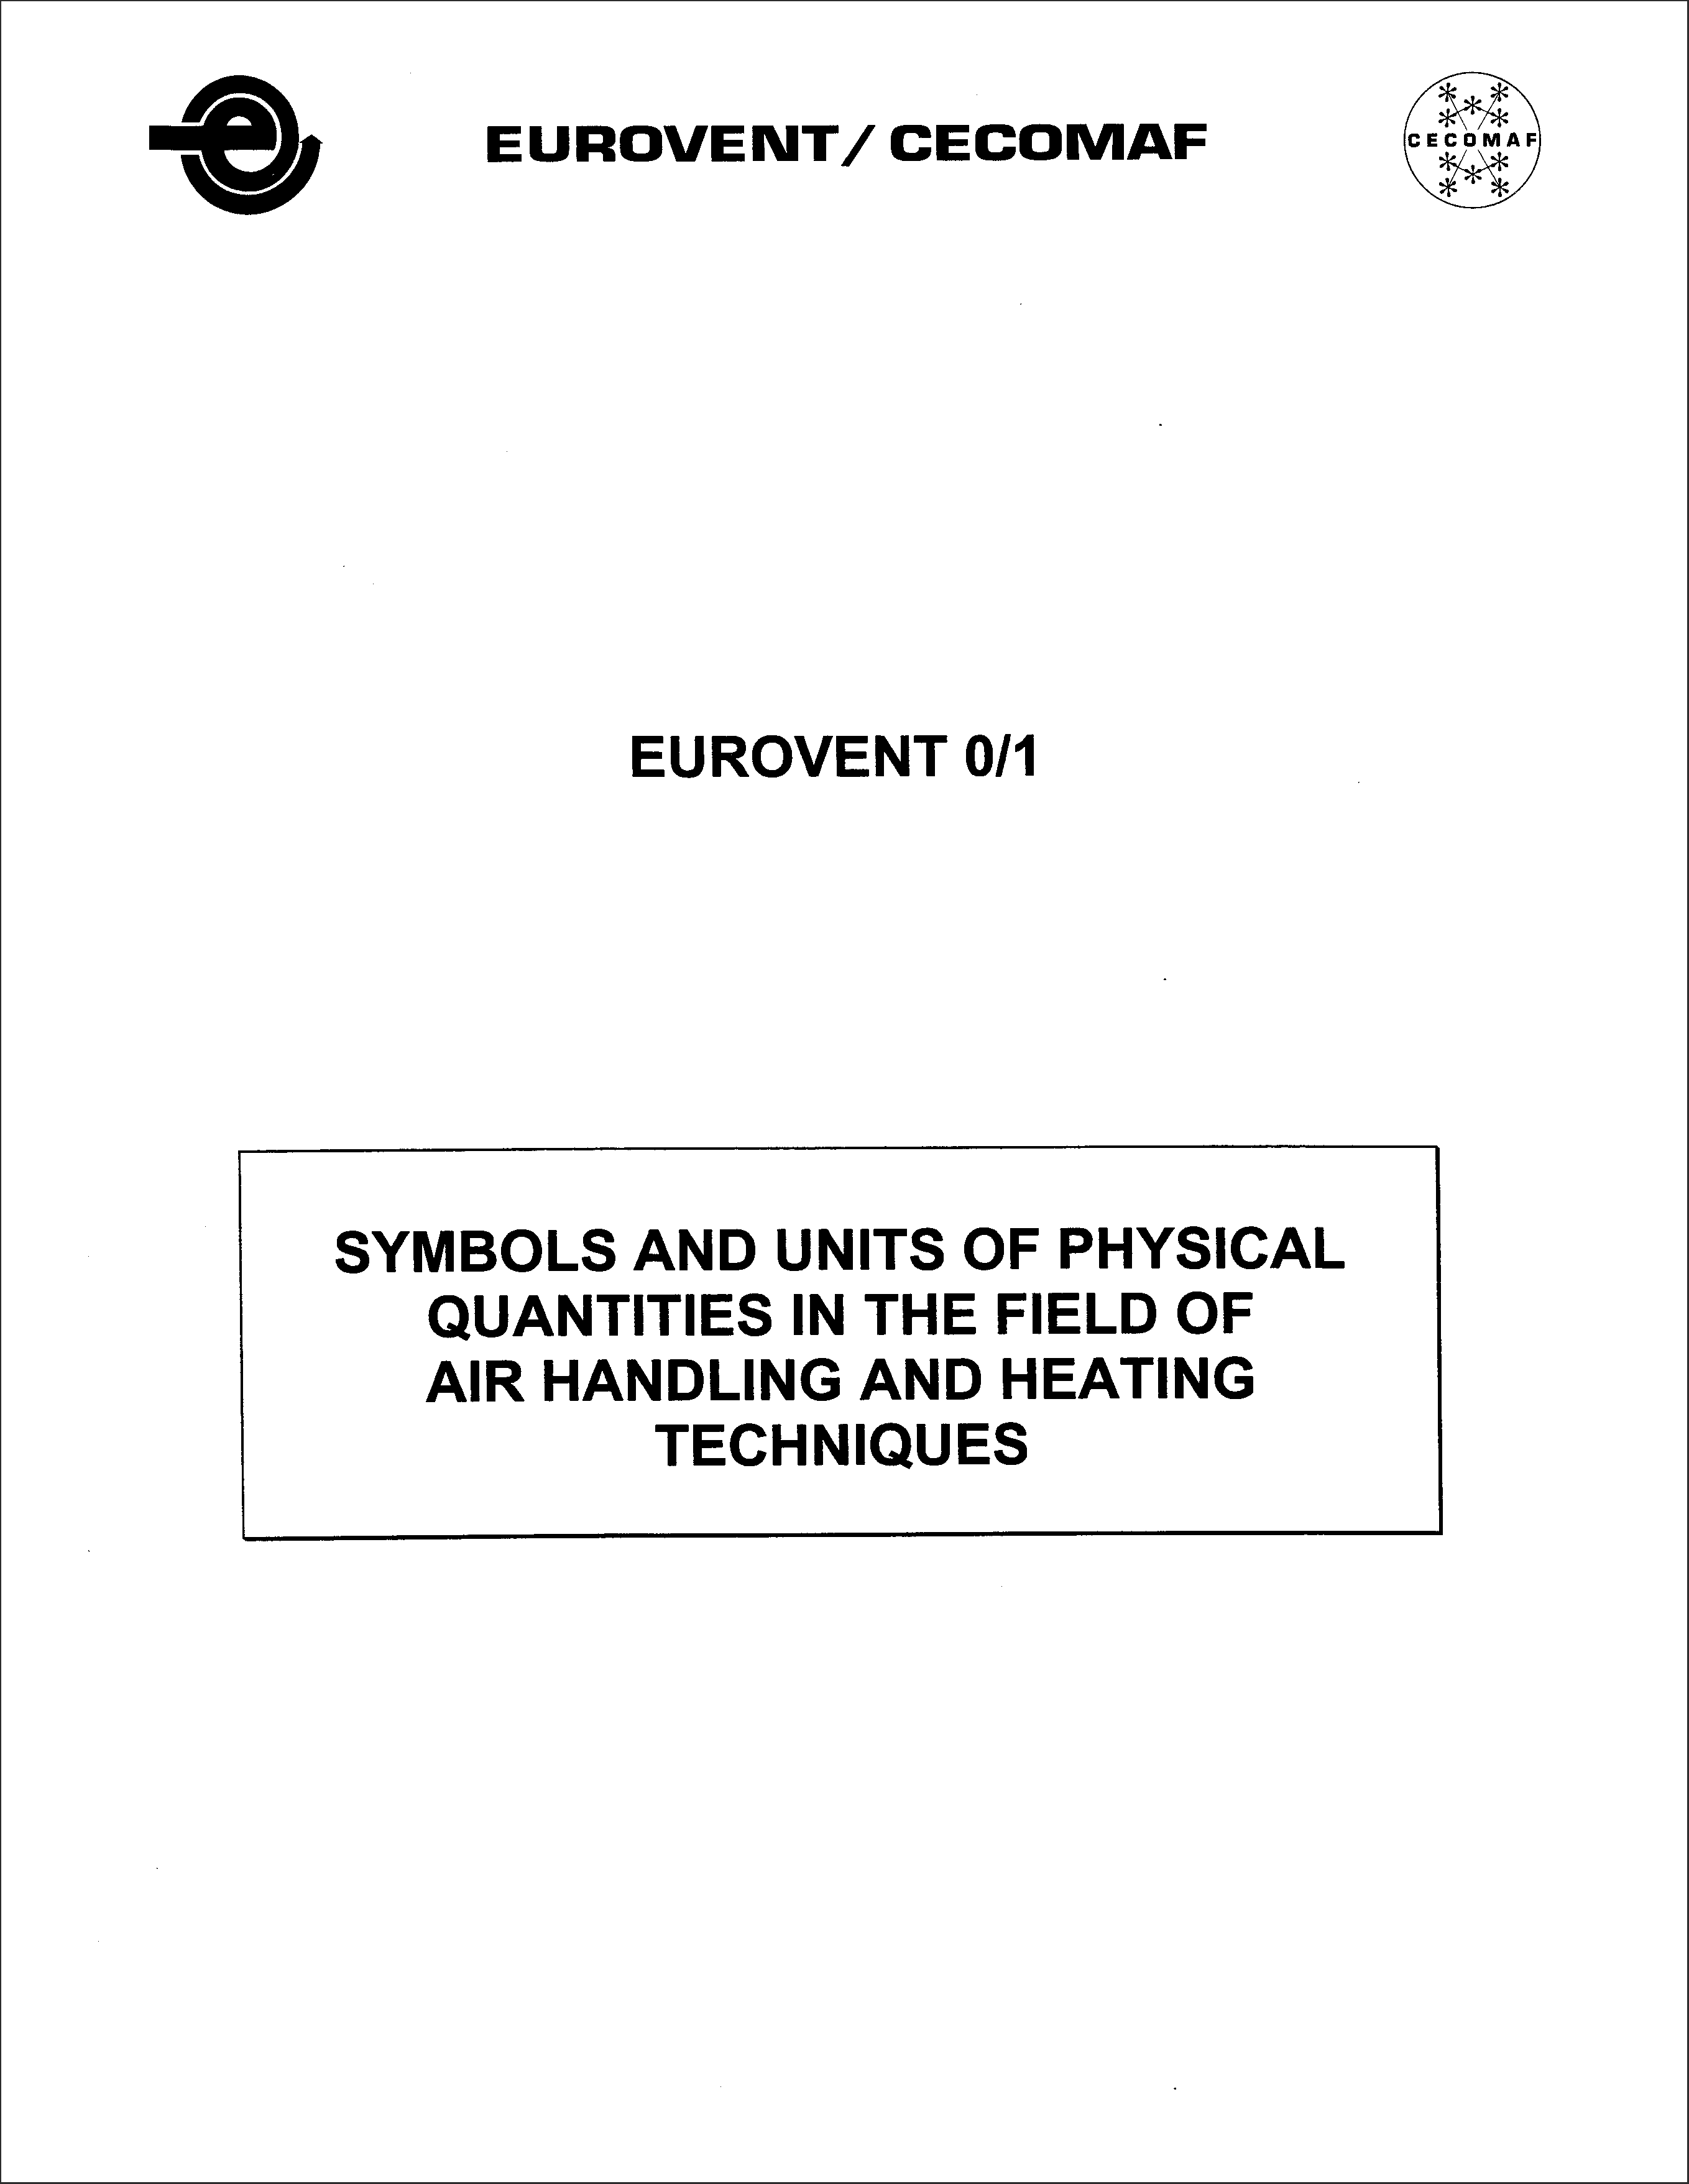 1980 - Symbols and units of physical quantities in the field of air handling and heating techniques